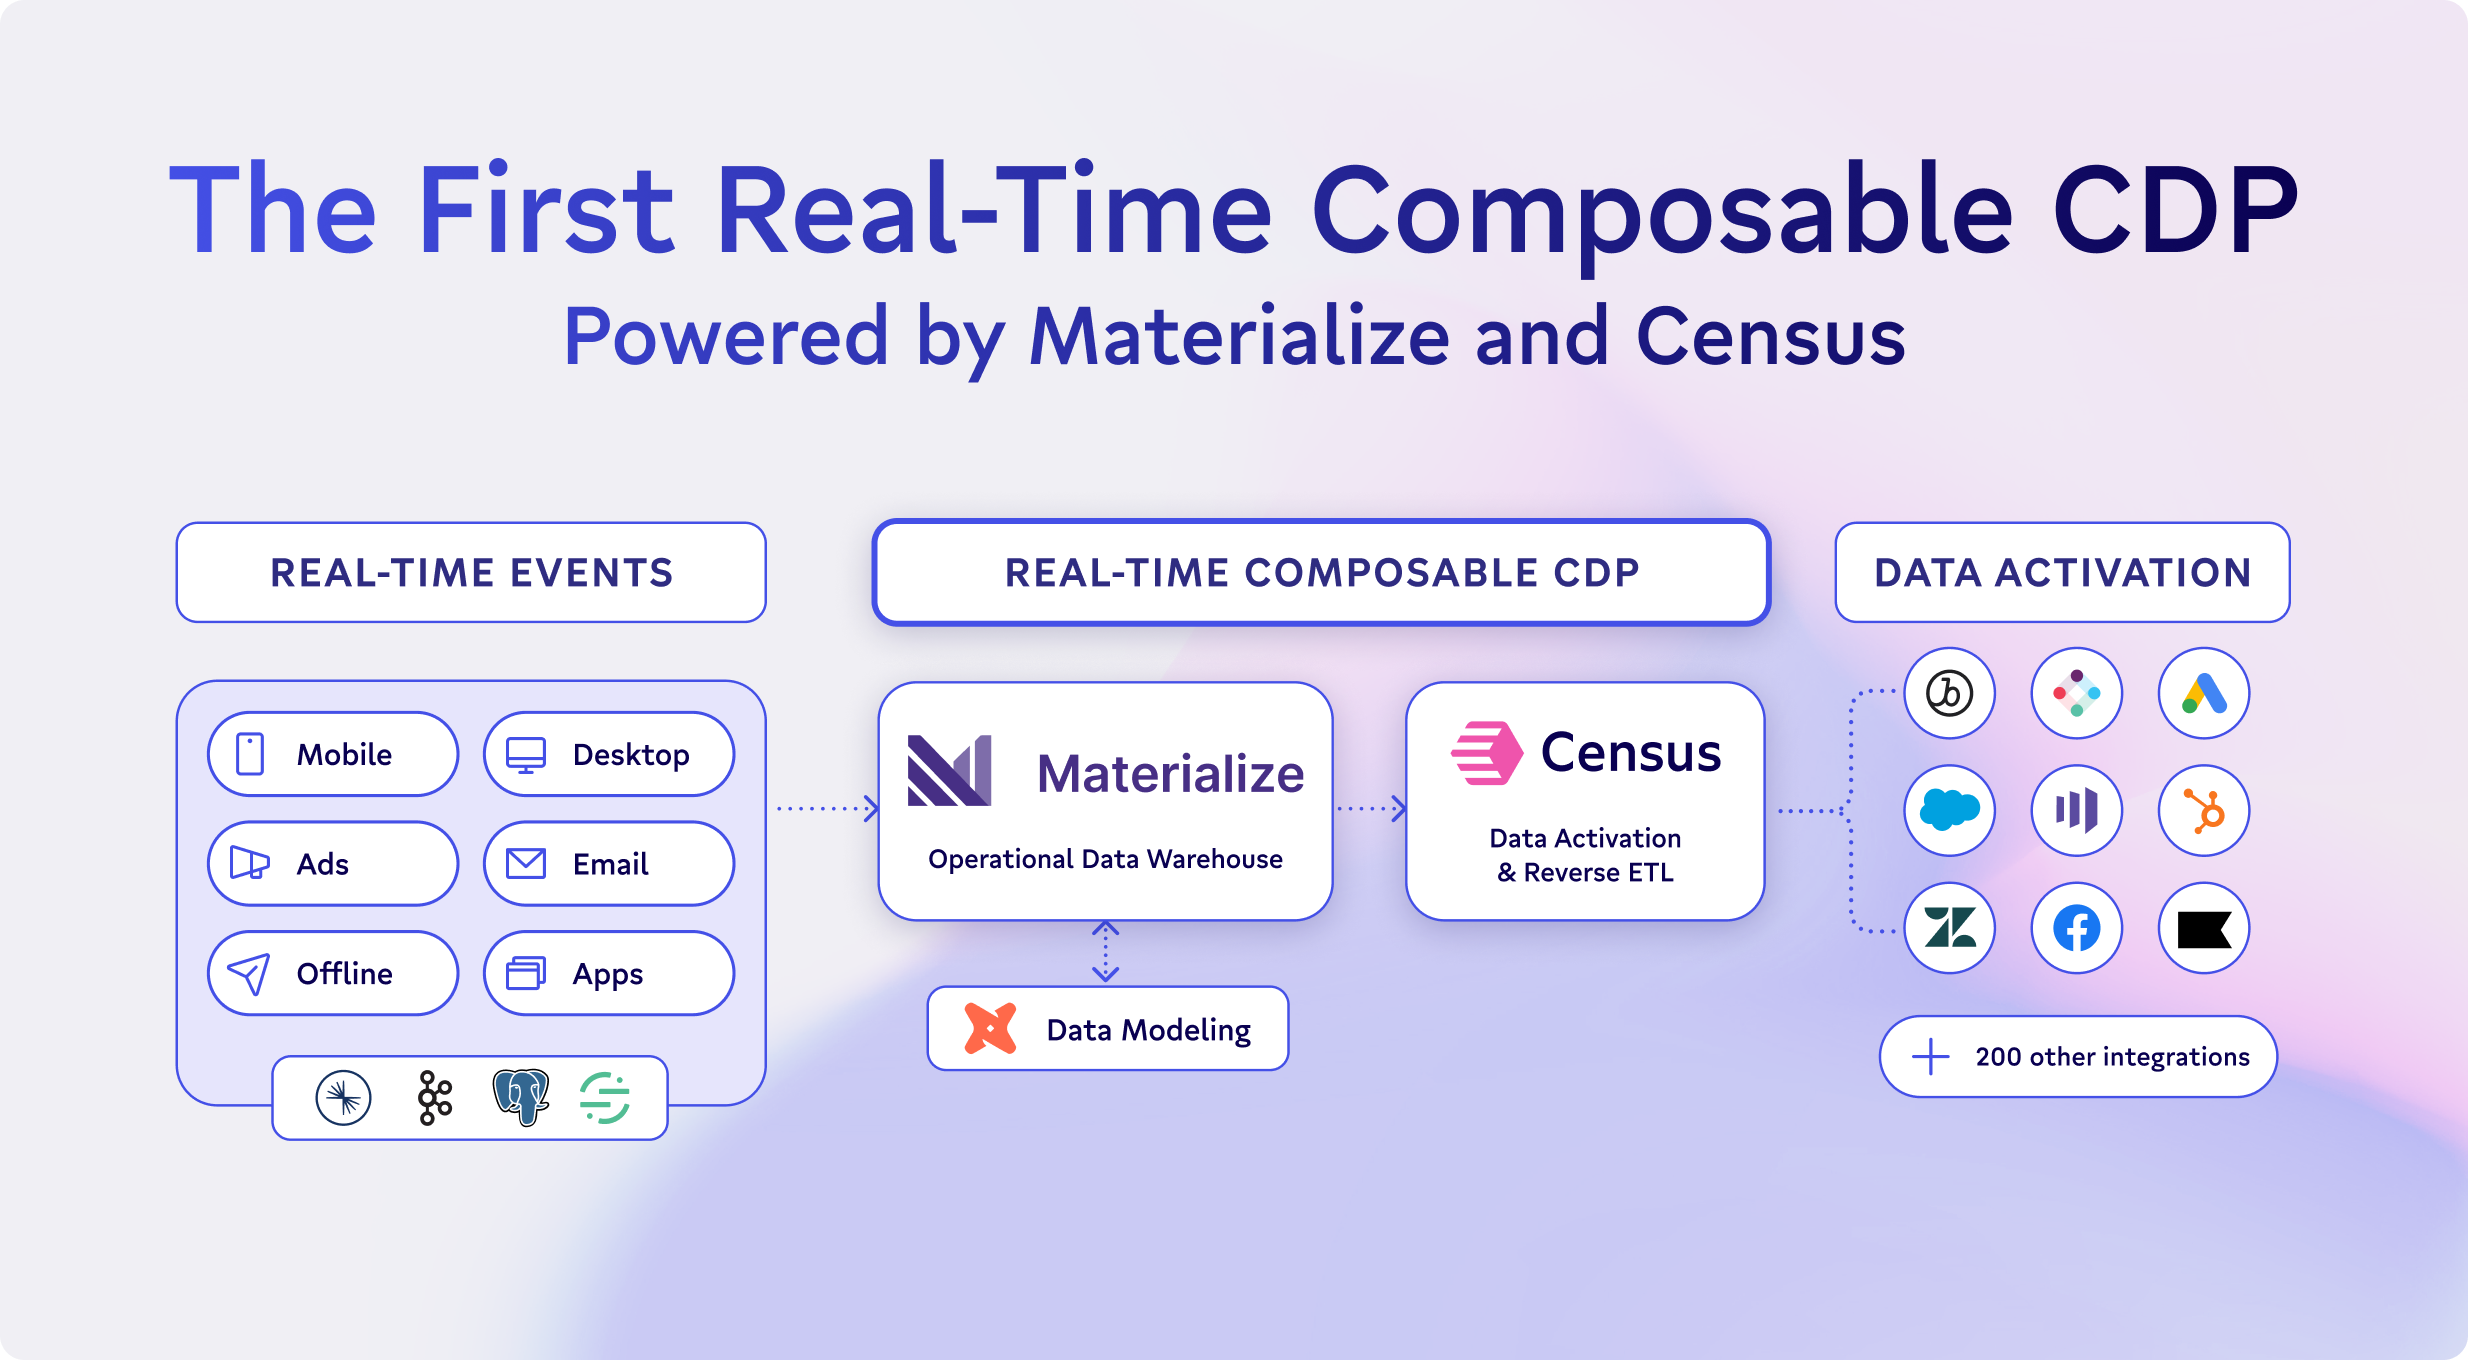 The First Real-Time Composable CDP with Materialize and Census Live Syncs